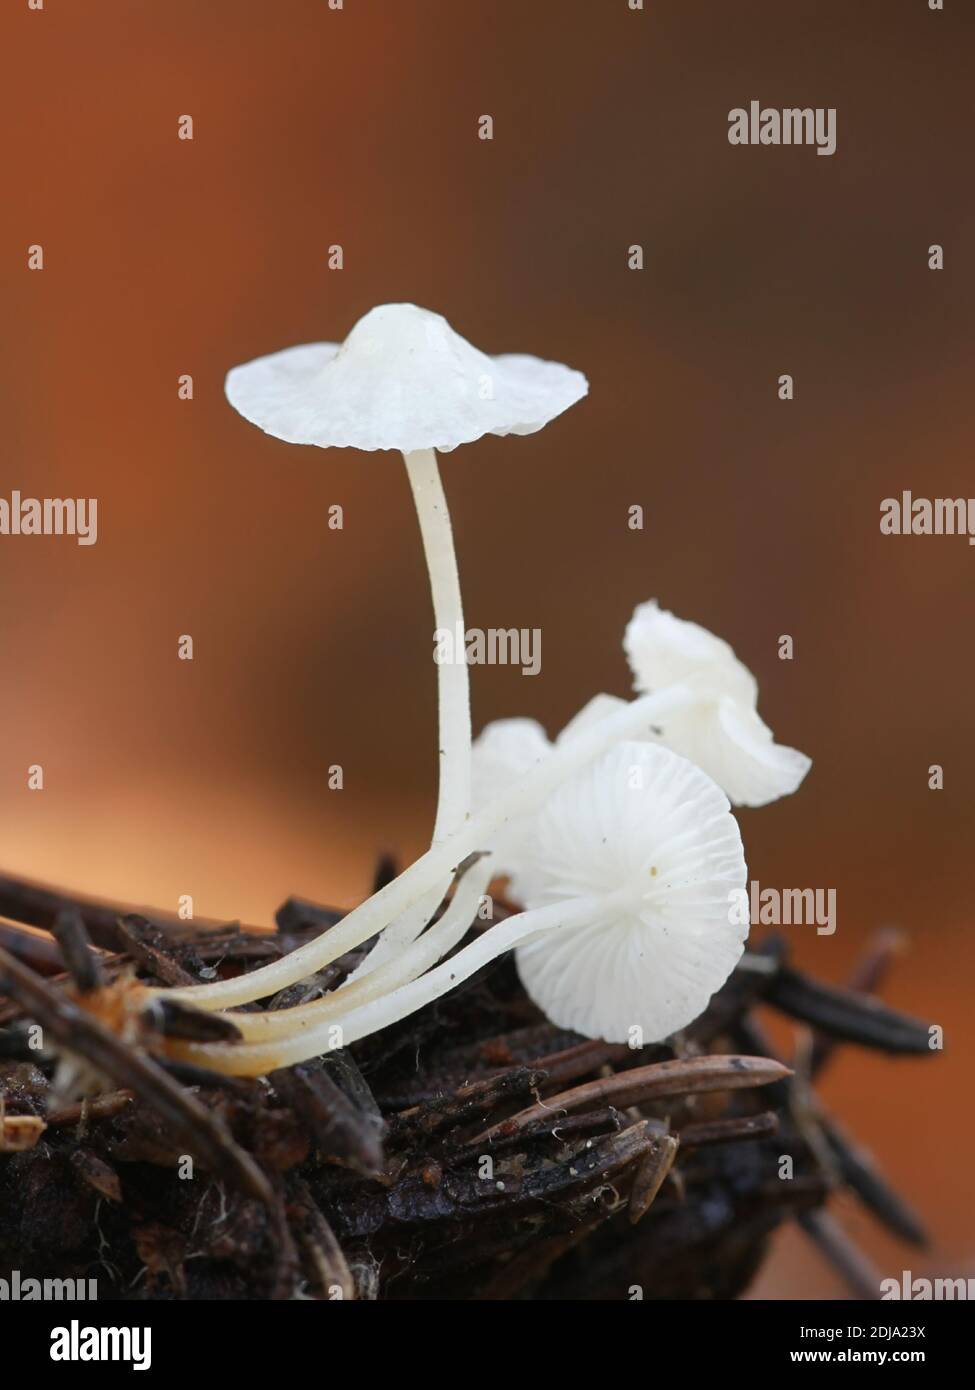 Hemimycena lactea, also called Mycena delicatula, commonly known as milky bonnet, wild mushroom from Finland Stock Photo